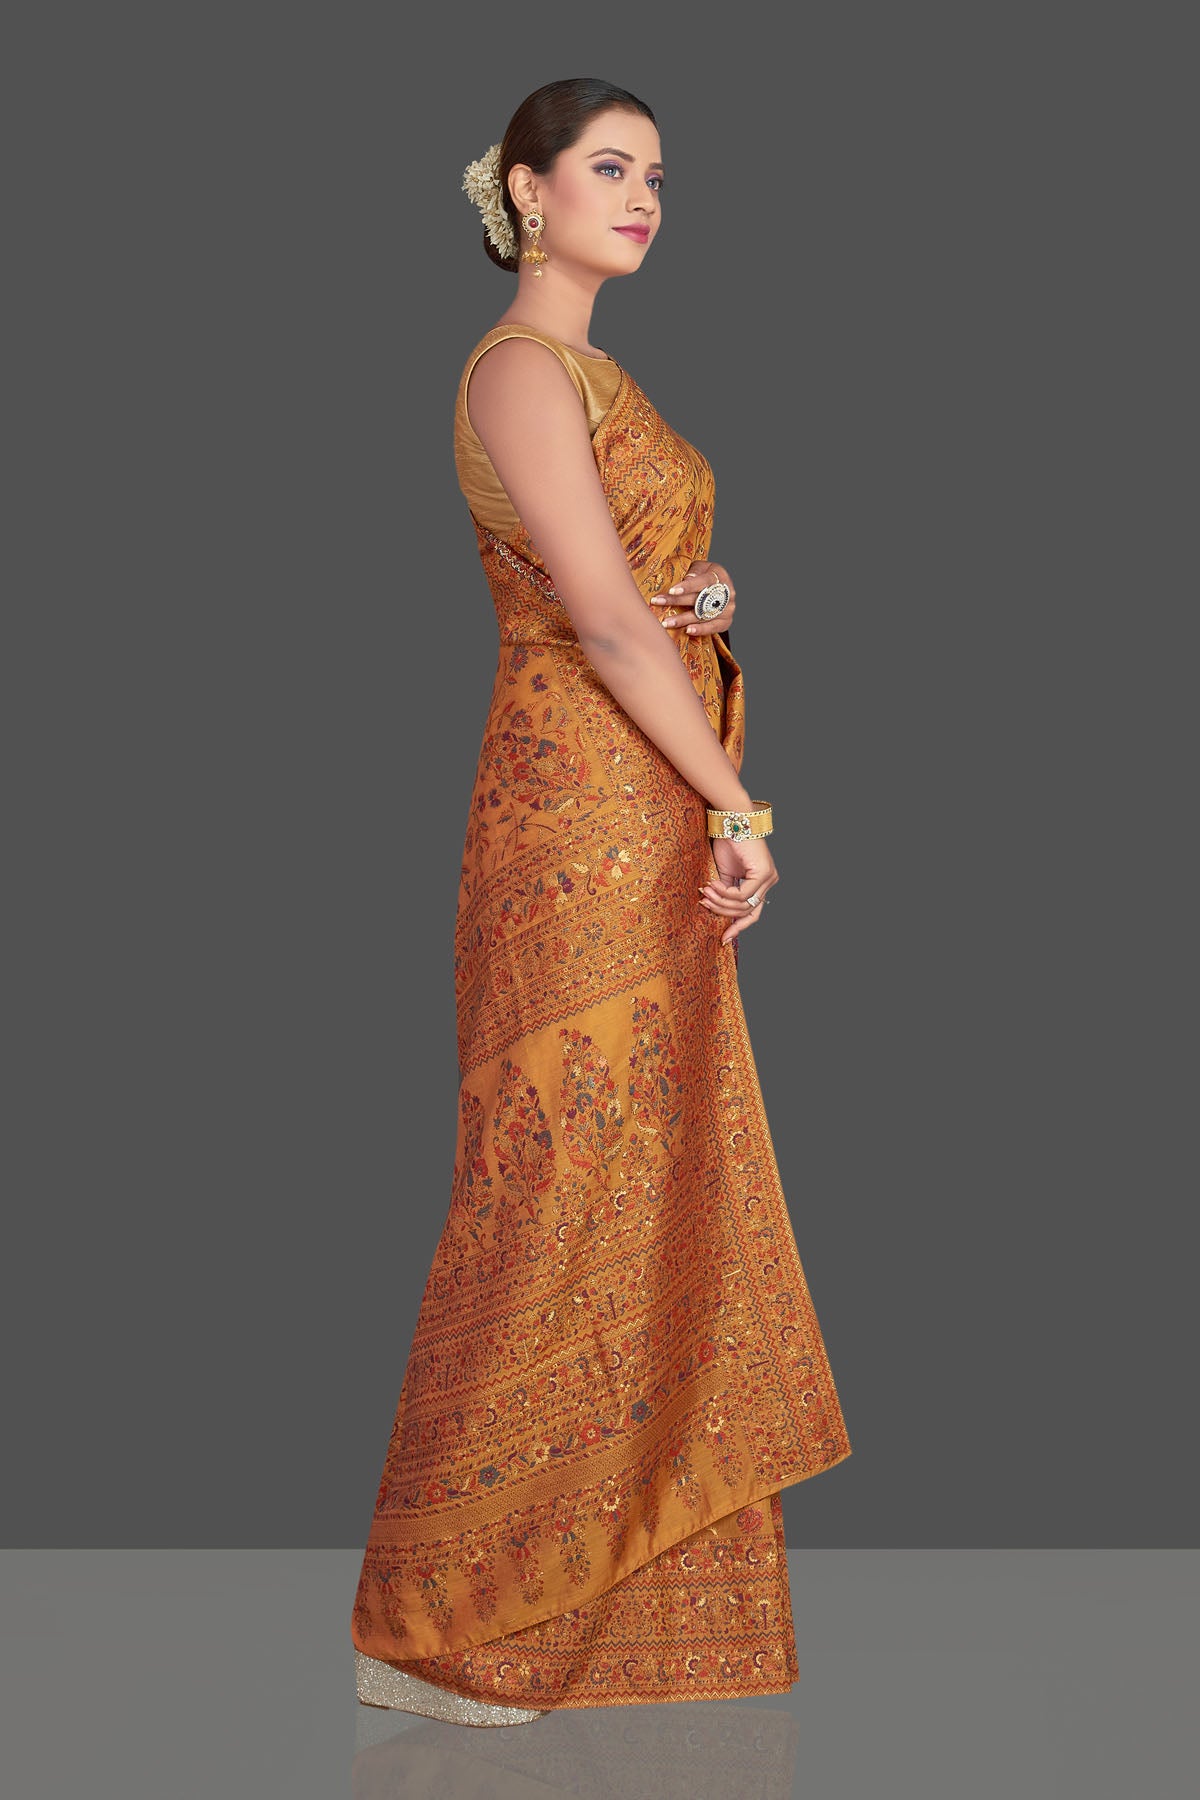 Buy stunning mustard yellow Kani weave sari online in USA. Make your presence felt on special occasions in beautiful embroidered sarees, handwoven saris, pure silk saris, tussar sarees from Pure Elegance Indian saree store in USA.-right